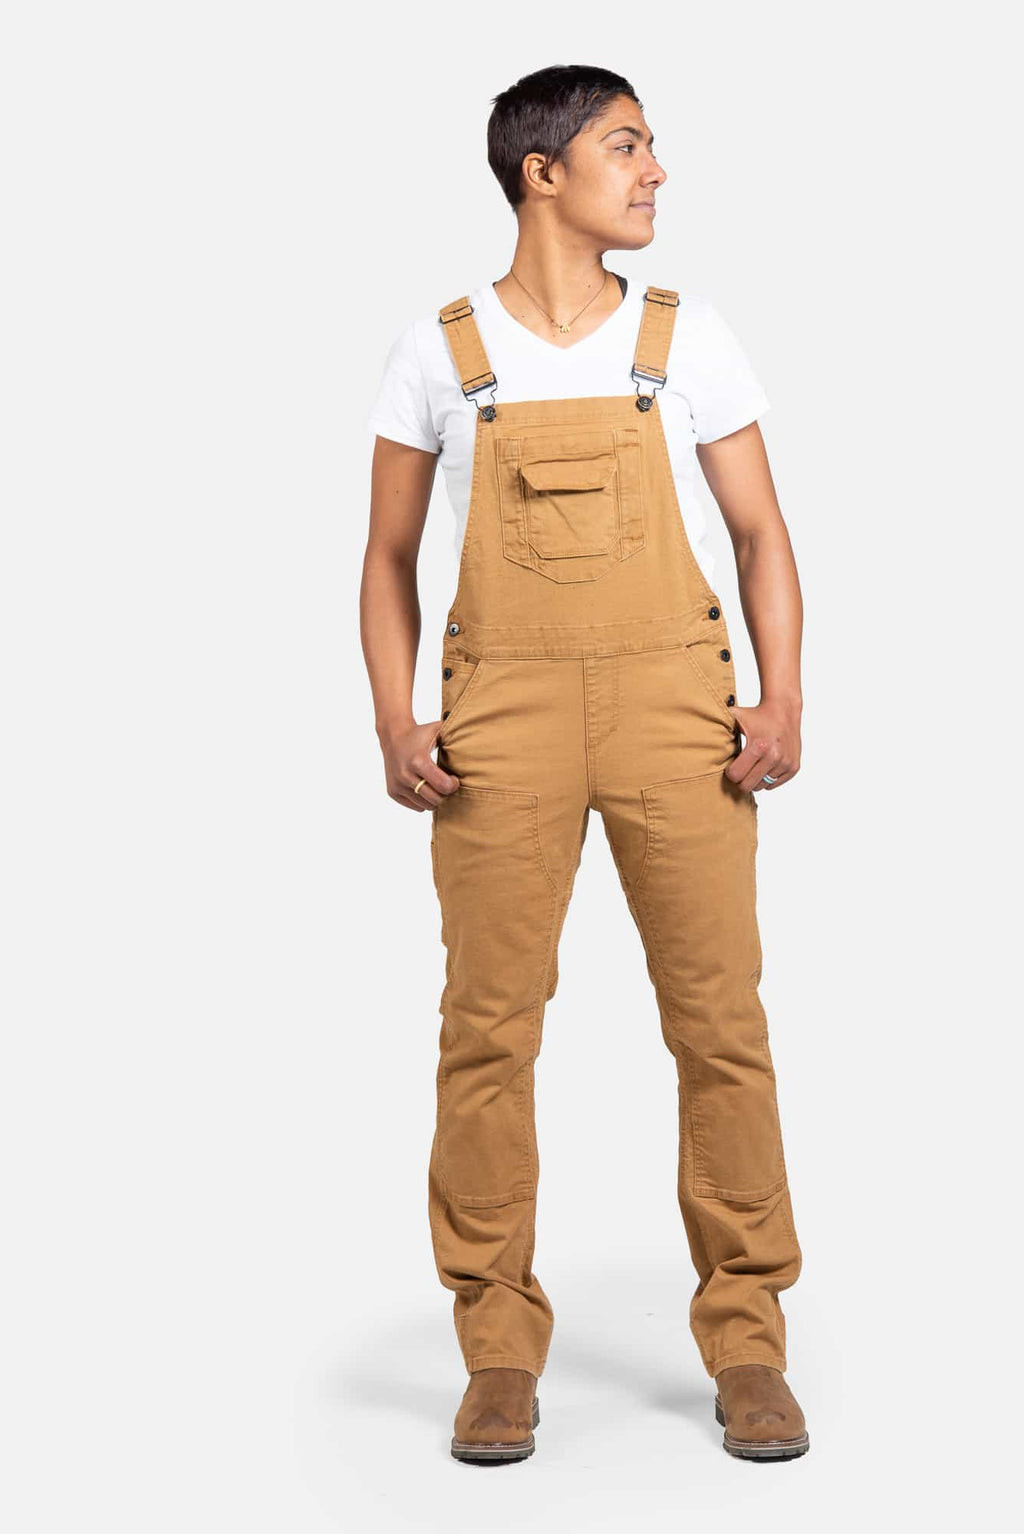 Freshley Overalls in Saddle Brown Canvas Work Pants Dovetail Workwear